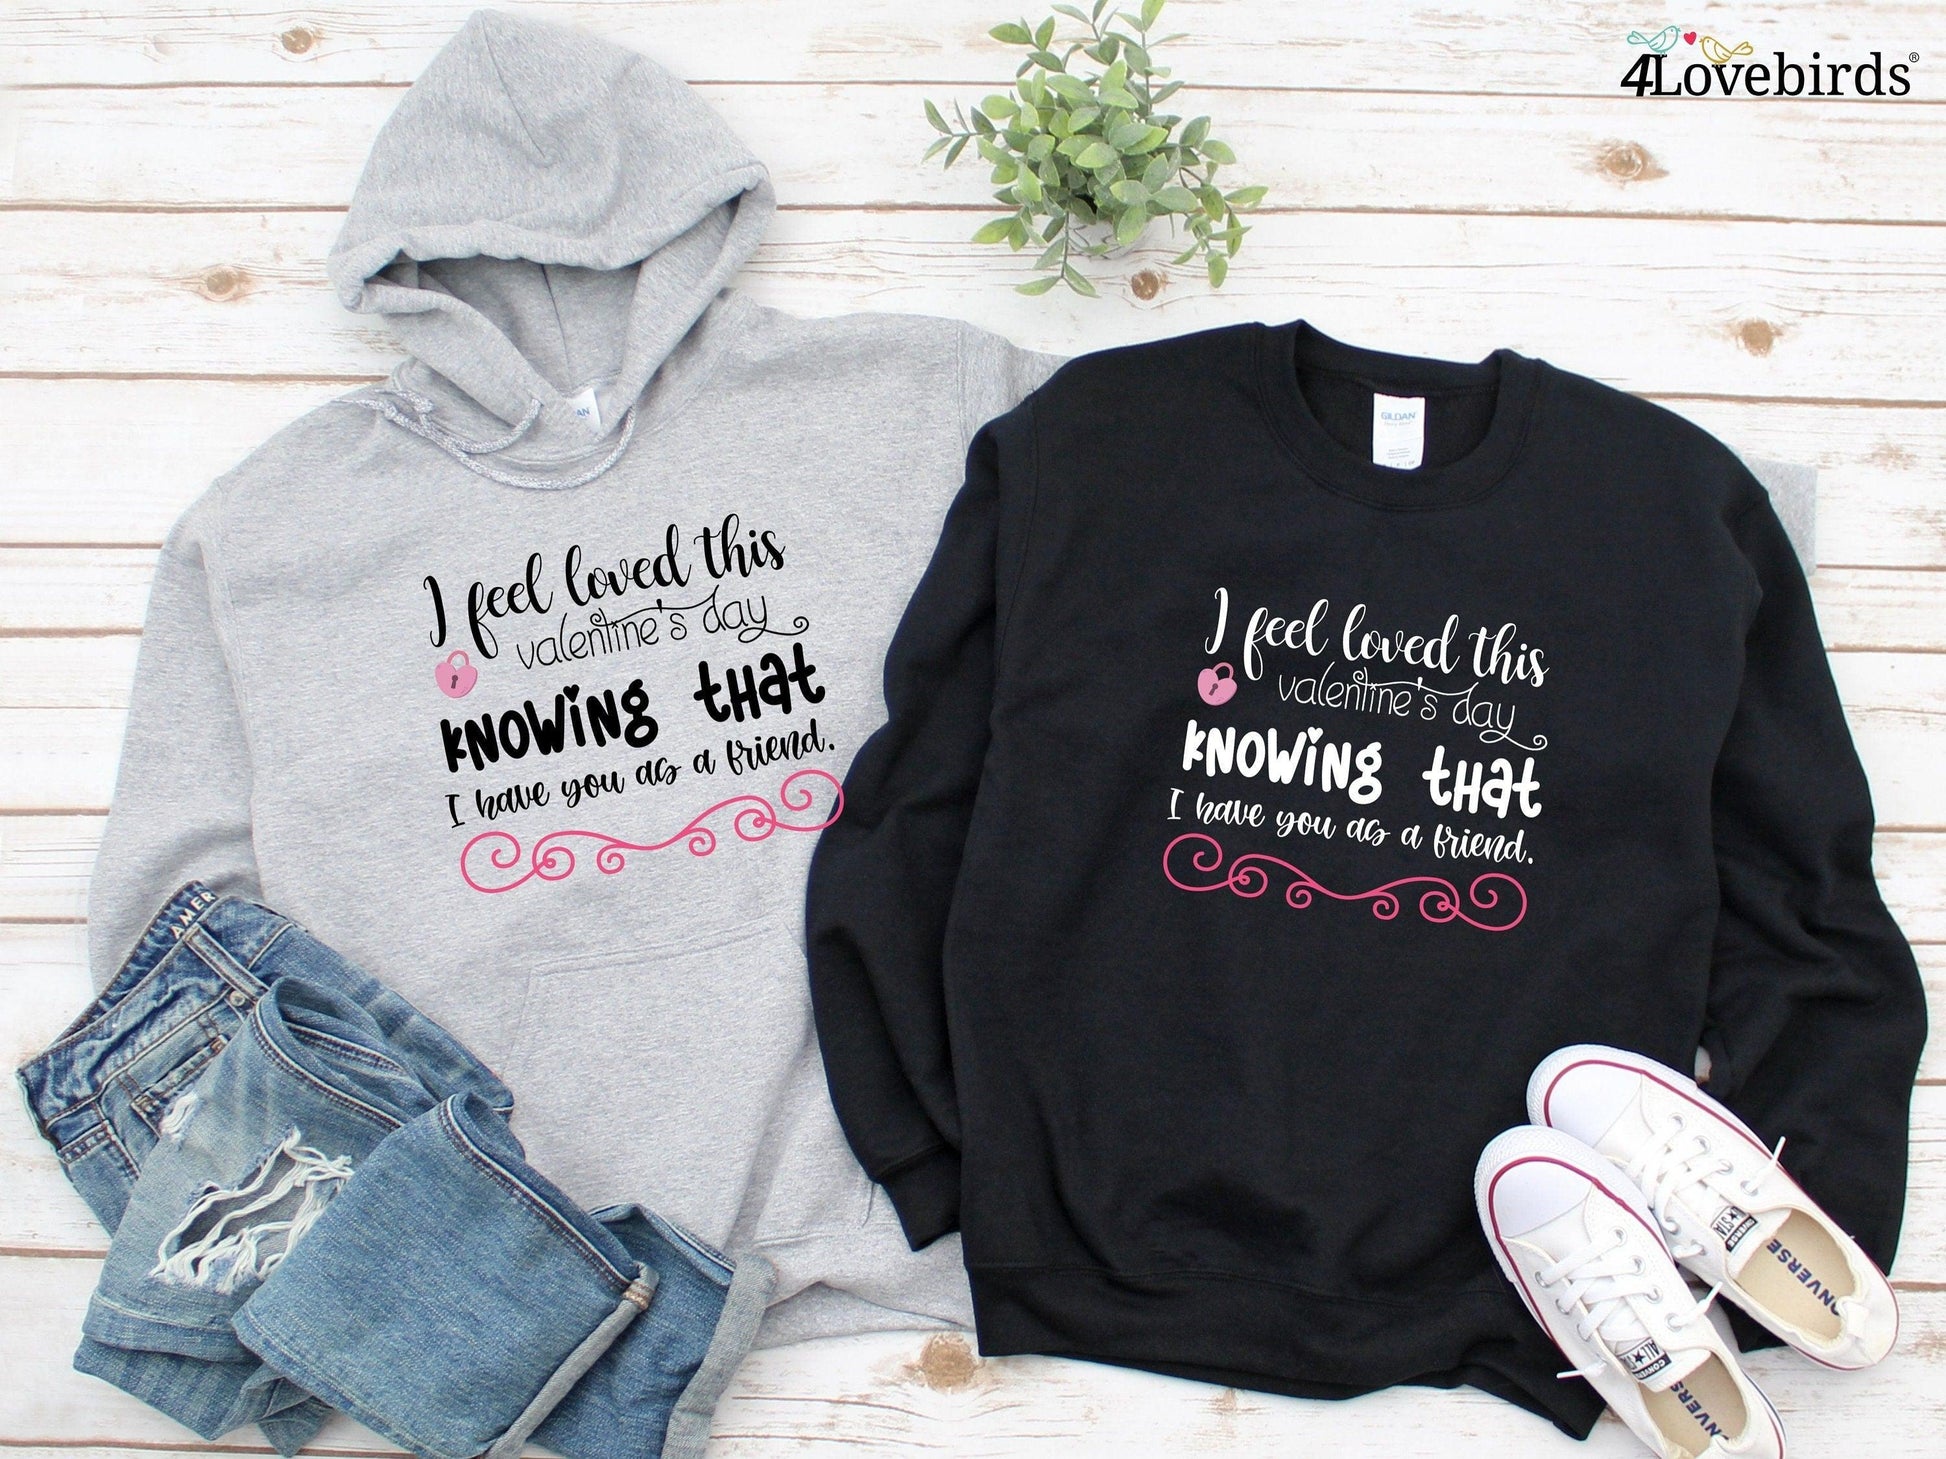 I feel loved this valentine's I feel loved this Valentine's Day knowing that I have you as a friend Hoodie, Lovers T-shirt, Gift for Couples - 4Lovebirds